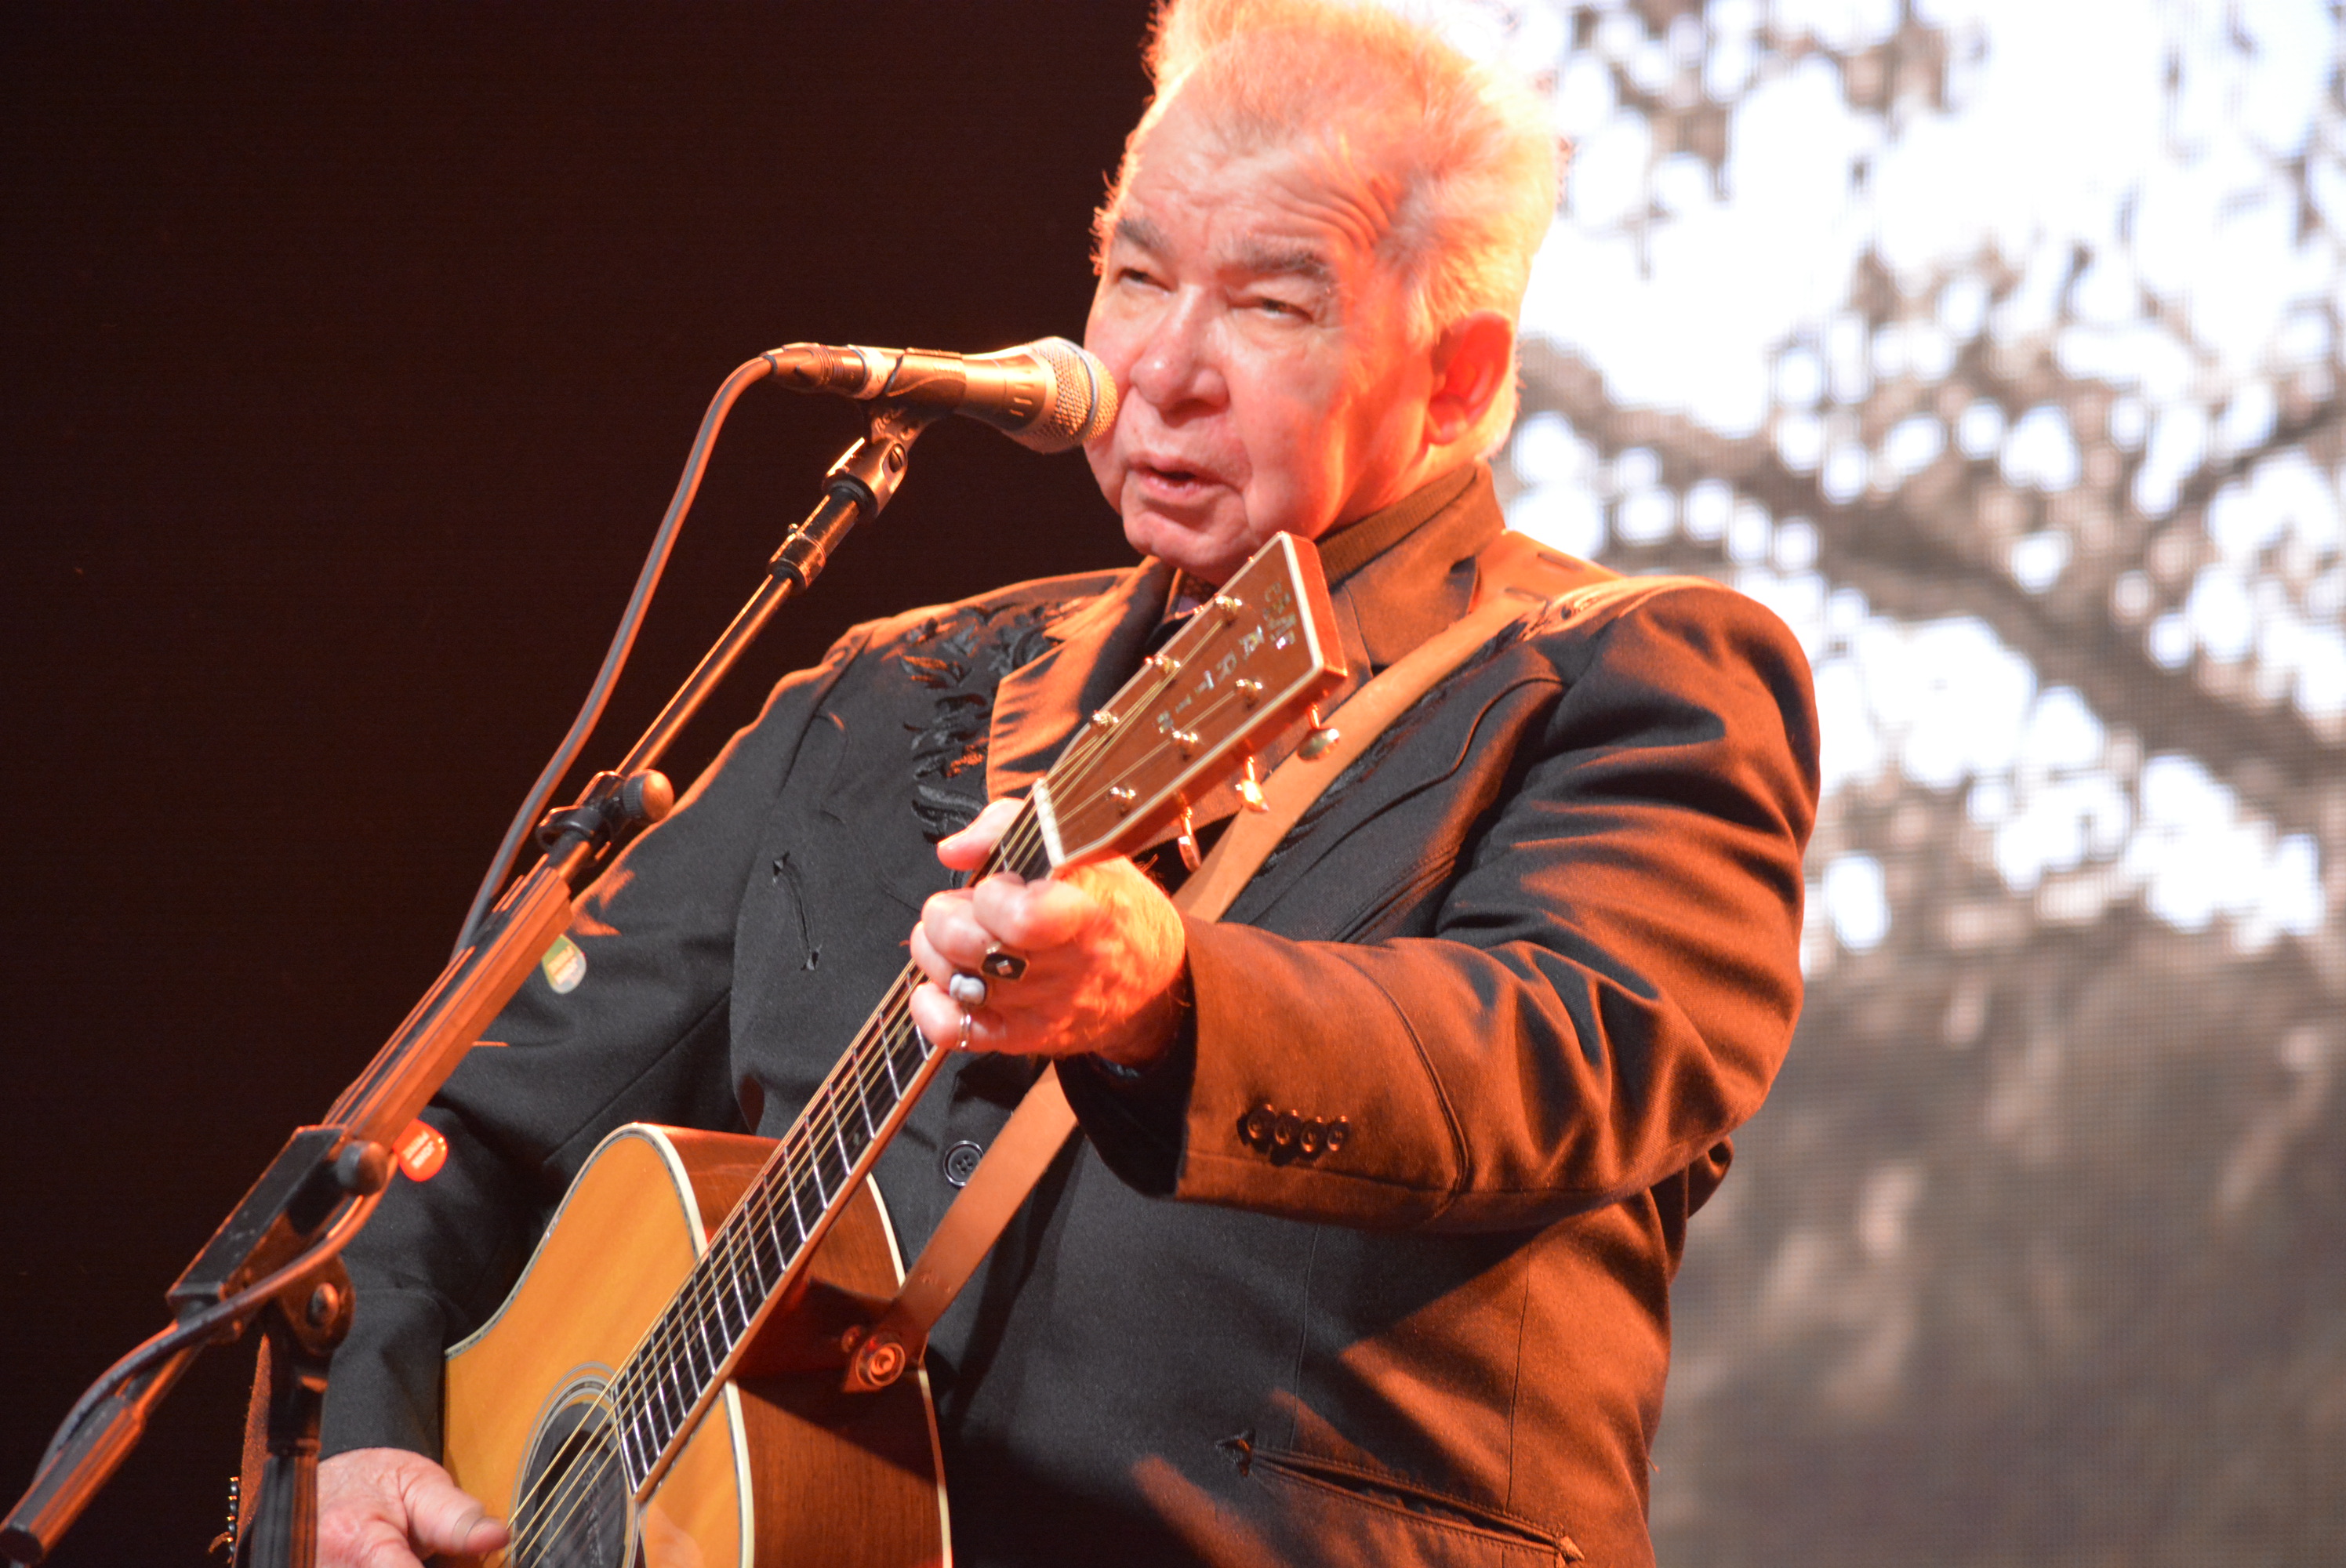 “When I Get To Heaven”: A Candid Conversation with John Prine